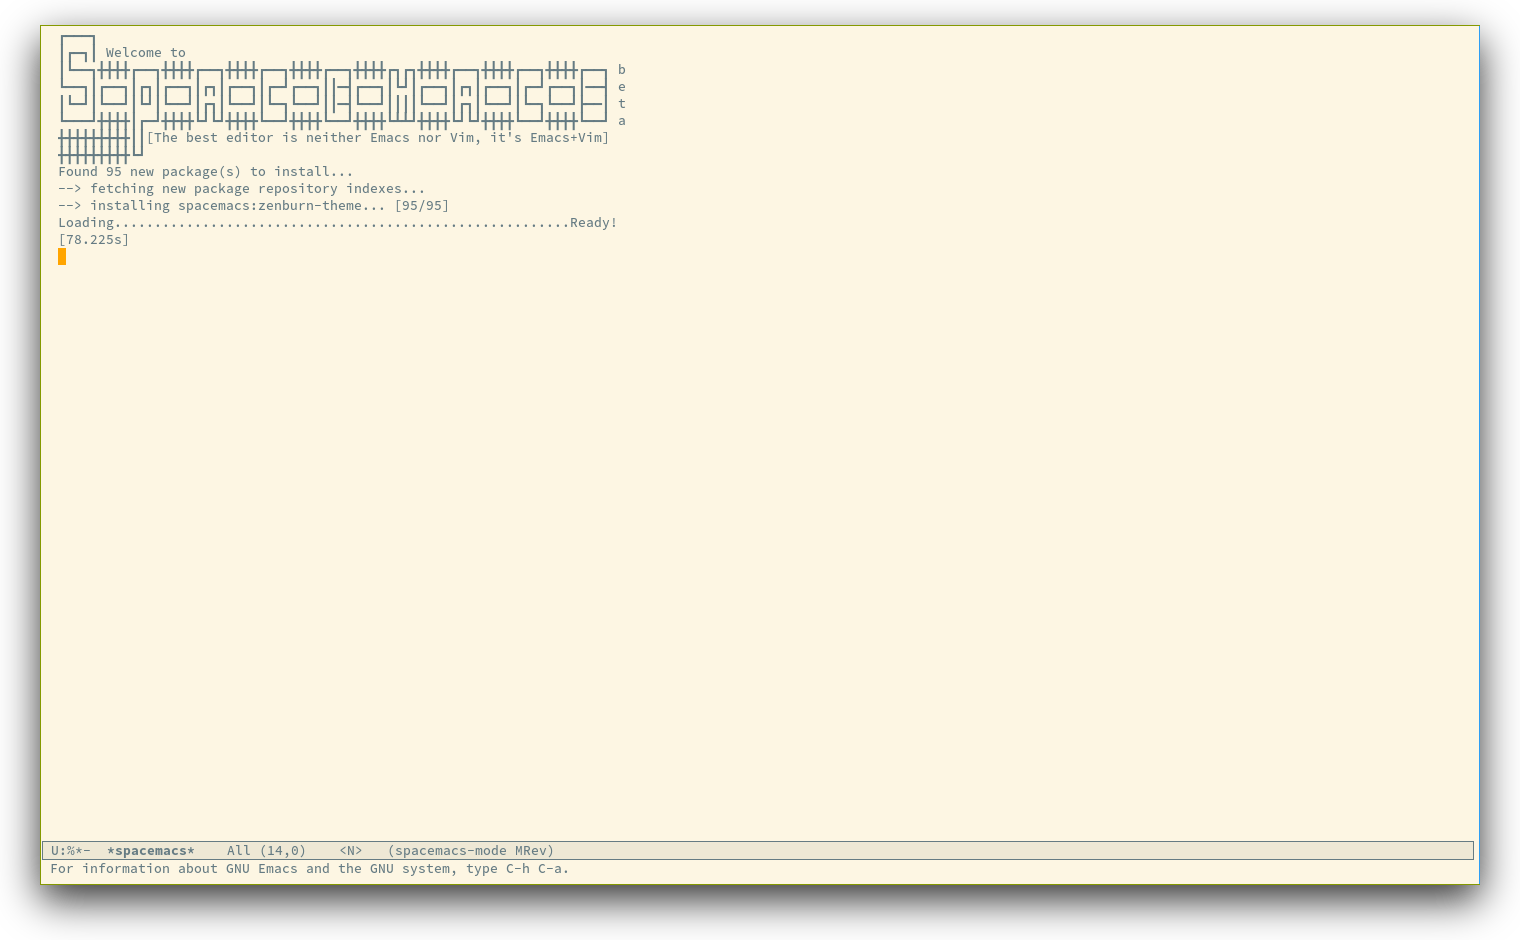 /TakeV/spacemacs/media/commit/23f43af23c48e979781d453a6e1c9b349082dbc1/doc/img/spacemacs-startup.png